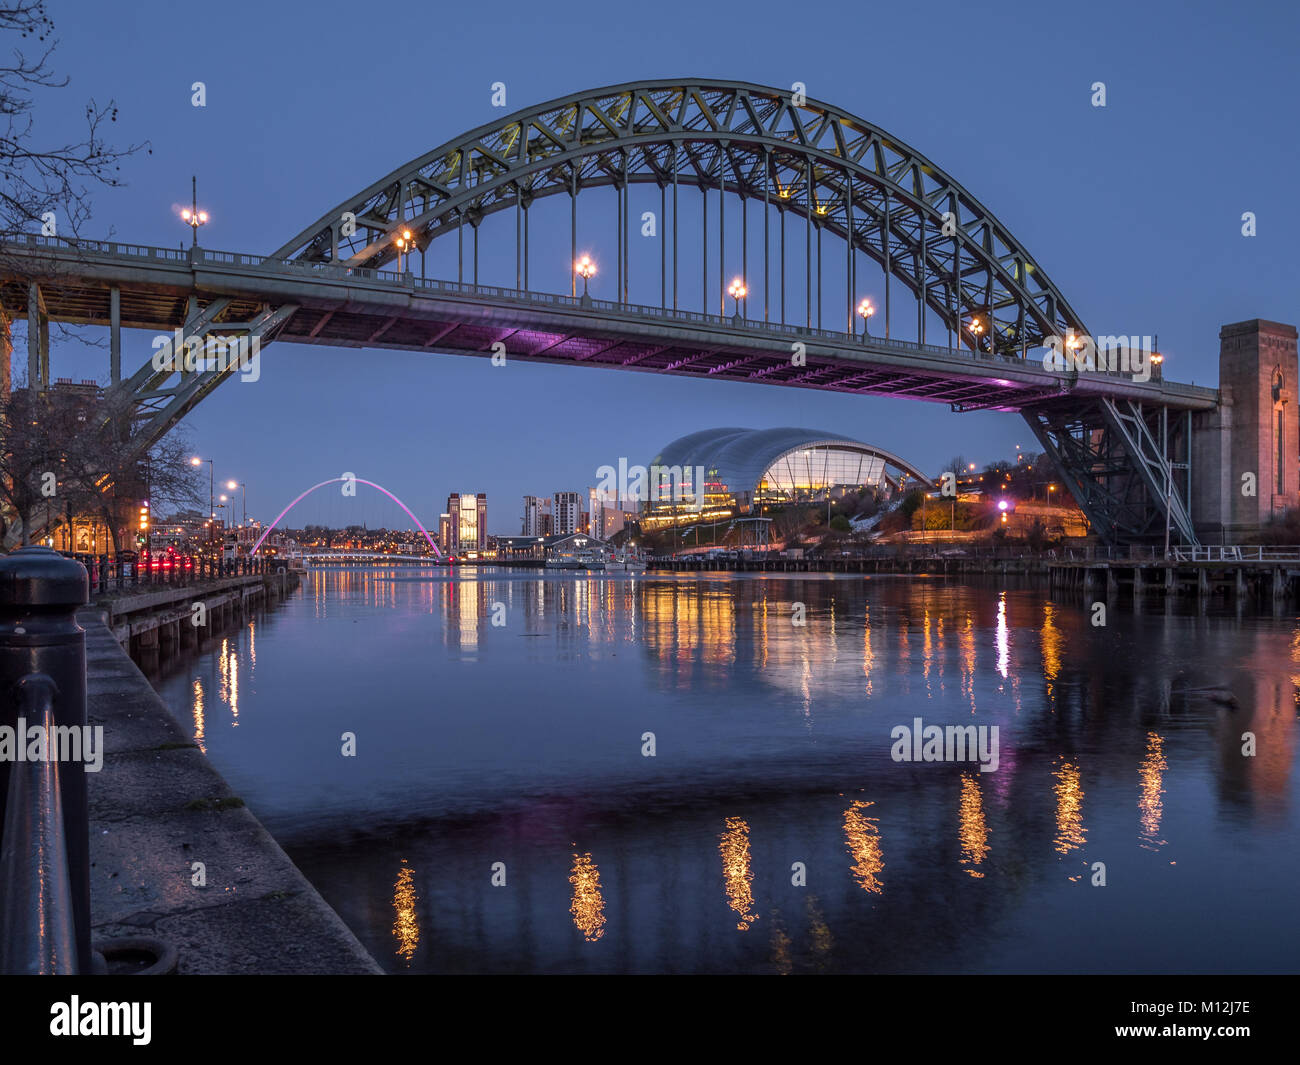 NEWCASTLE UPON TYNE, TYNE AND WEAR/UK - JANUARY 20 : View of the Tyne and Millennium Bridges at dusk in Newcastle upon Tyne, Tyne and Wear on January 20, 2018 Stock Photo